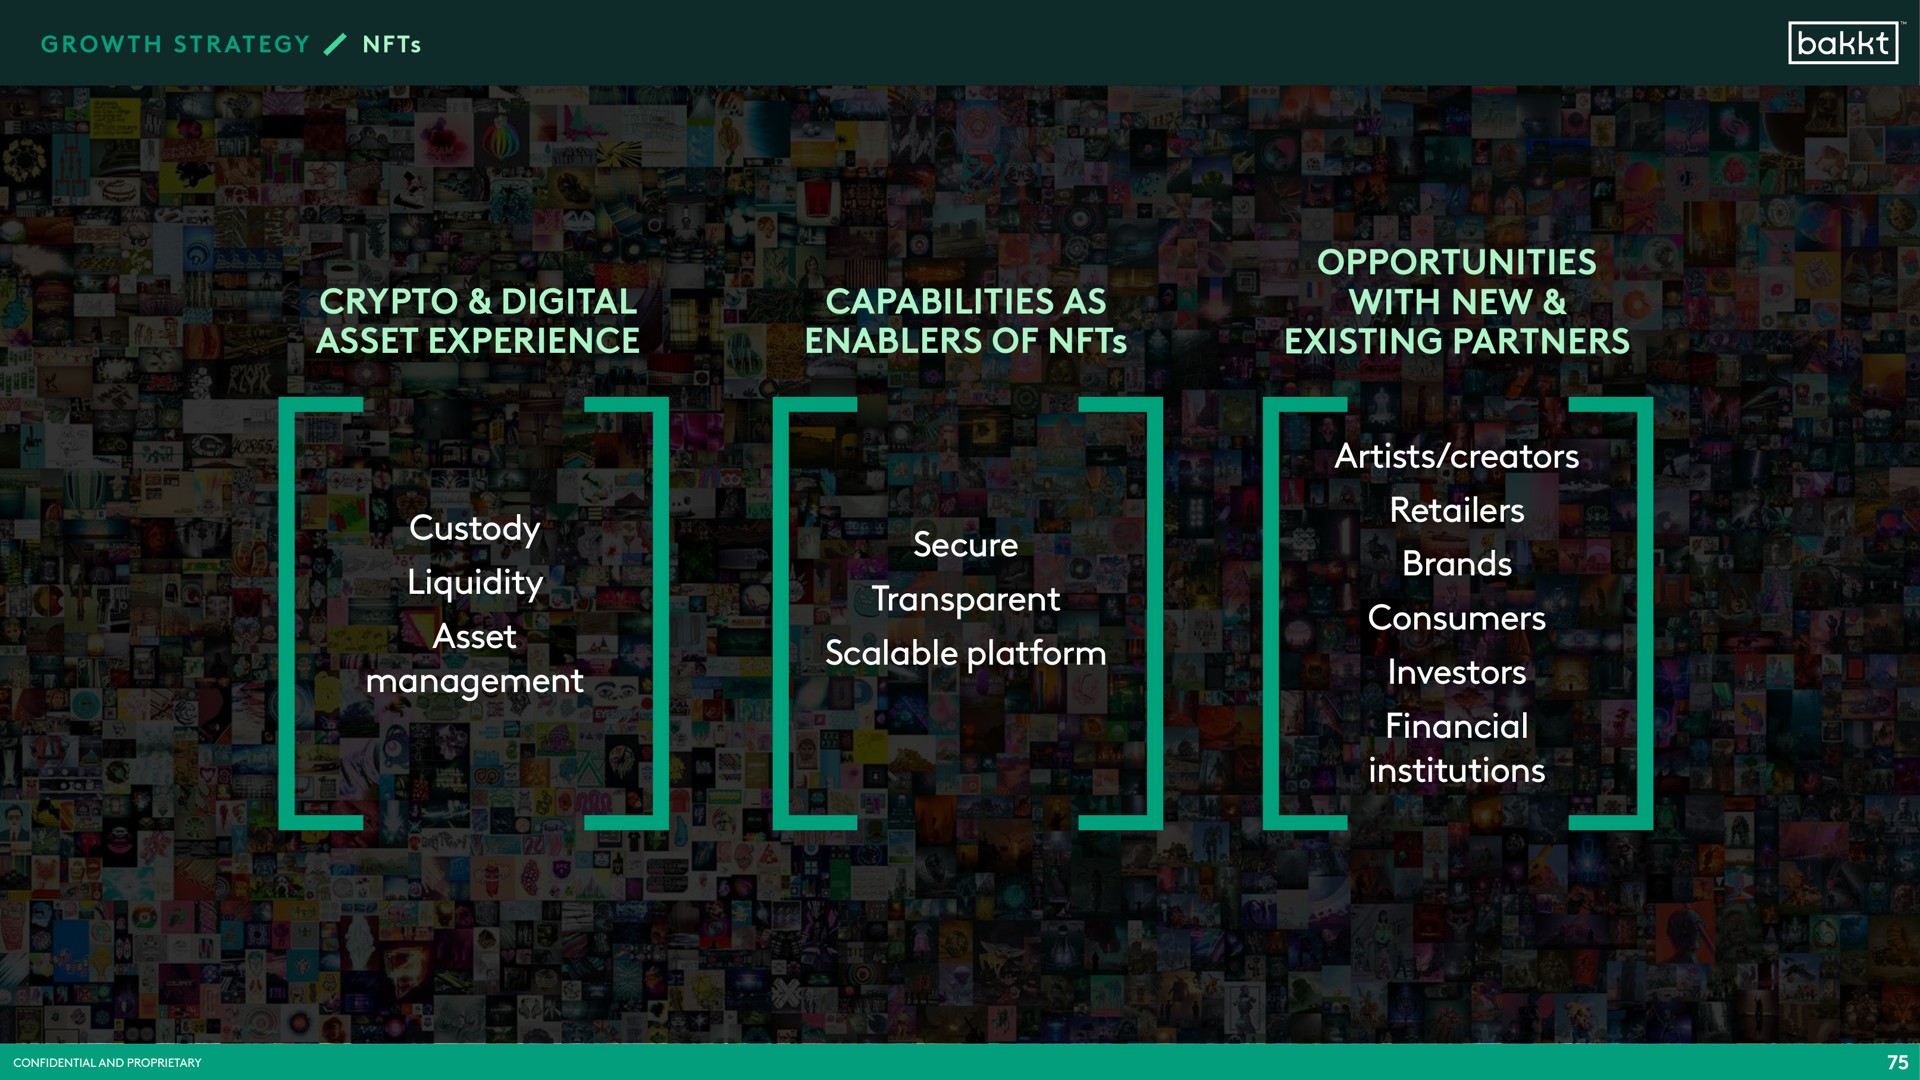 the future of digital asset experience capabilities as of custody liquidity asset management secure transparent scalable platform opportunities with new existing partners artists creators retailers brands consumers investors financial institutions | Bakkt